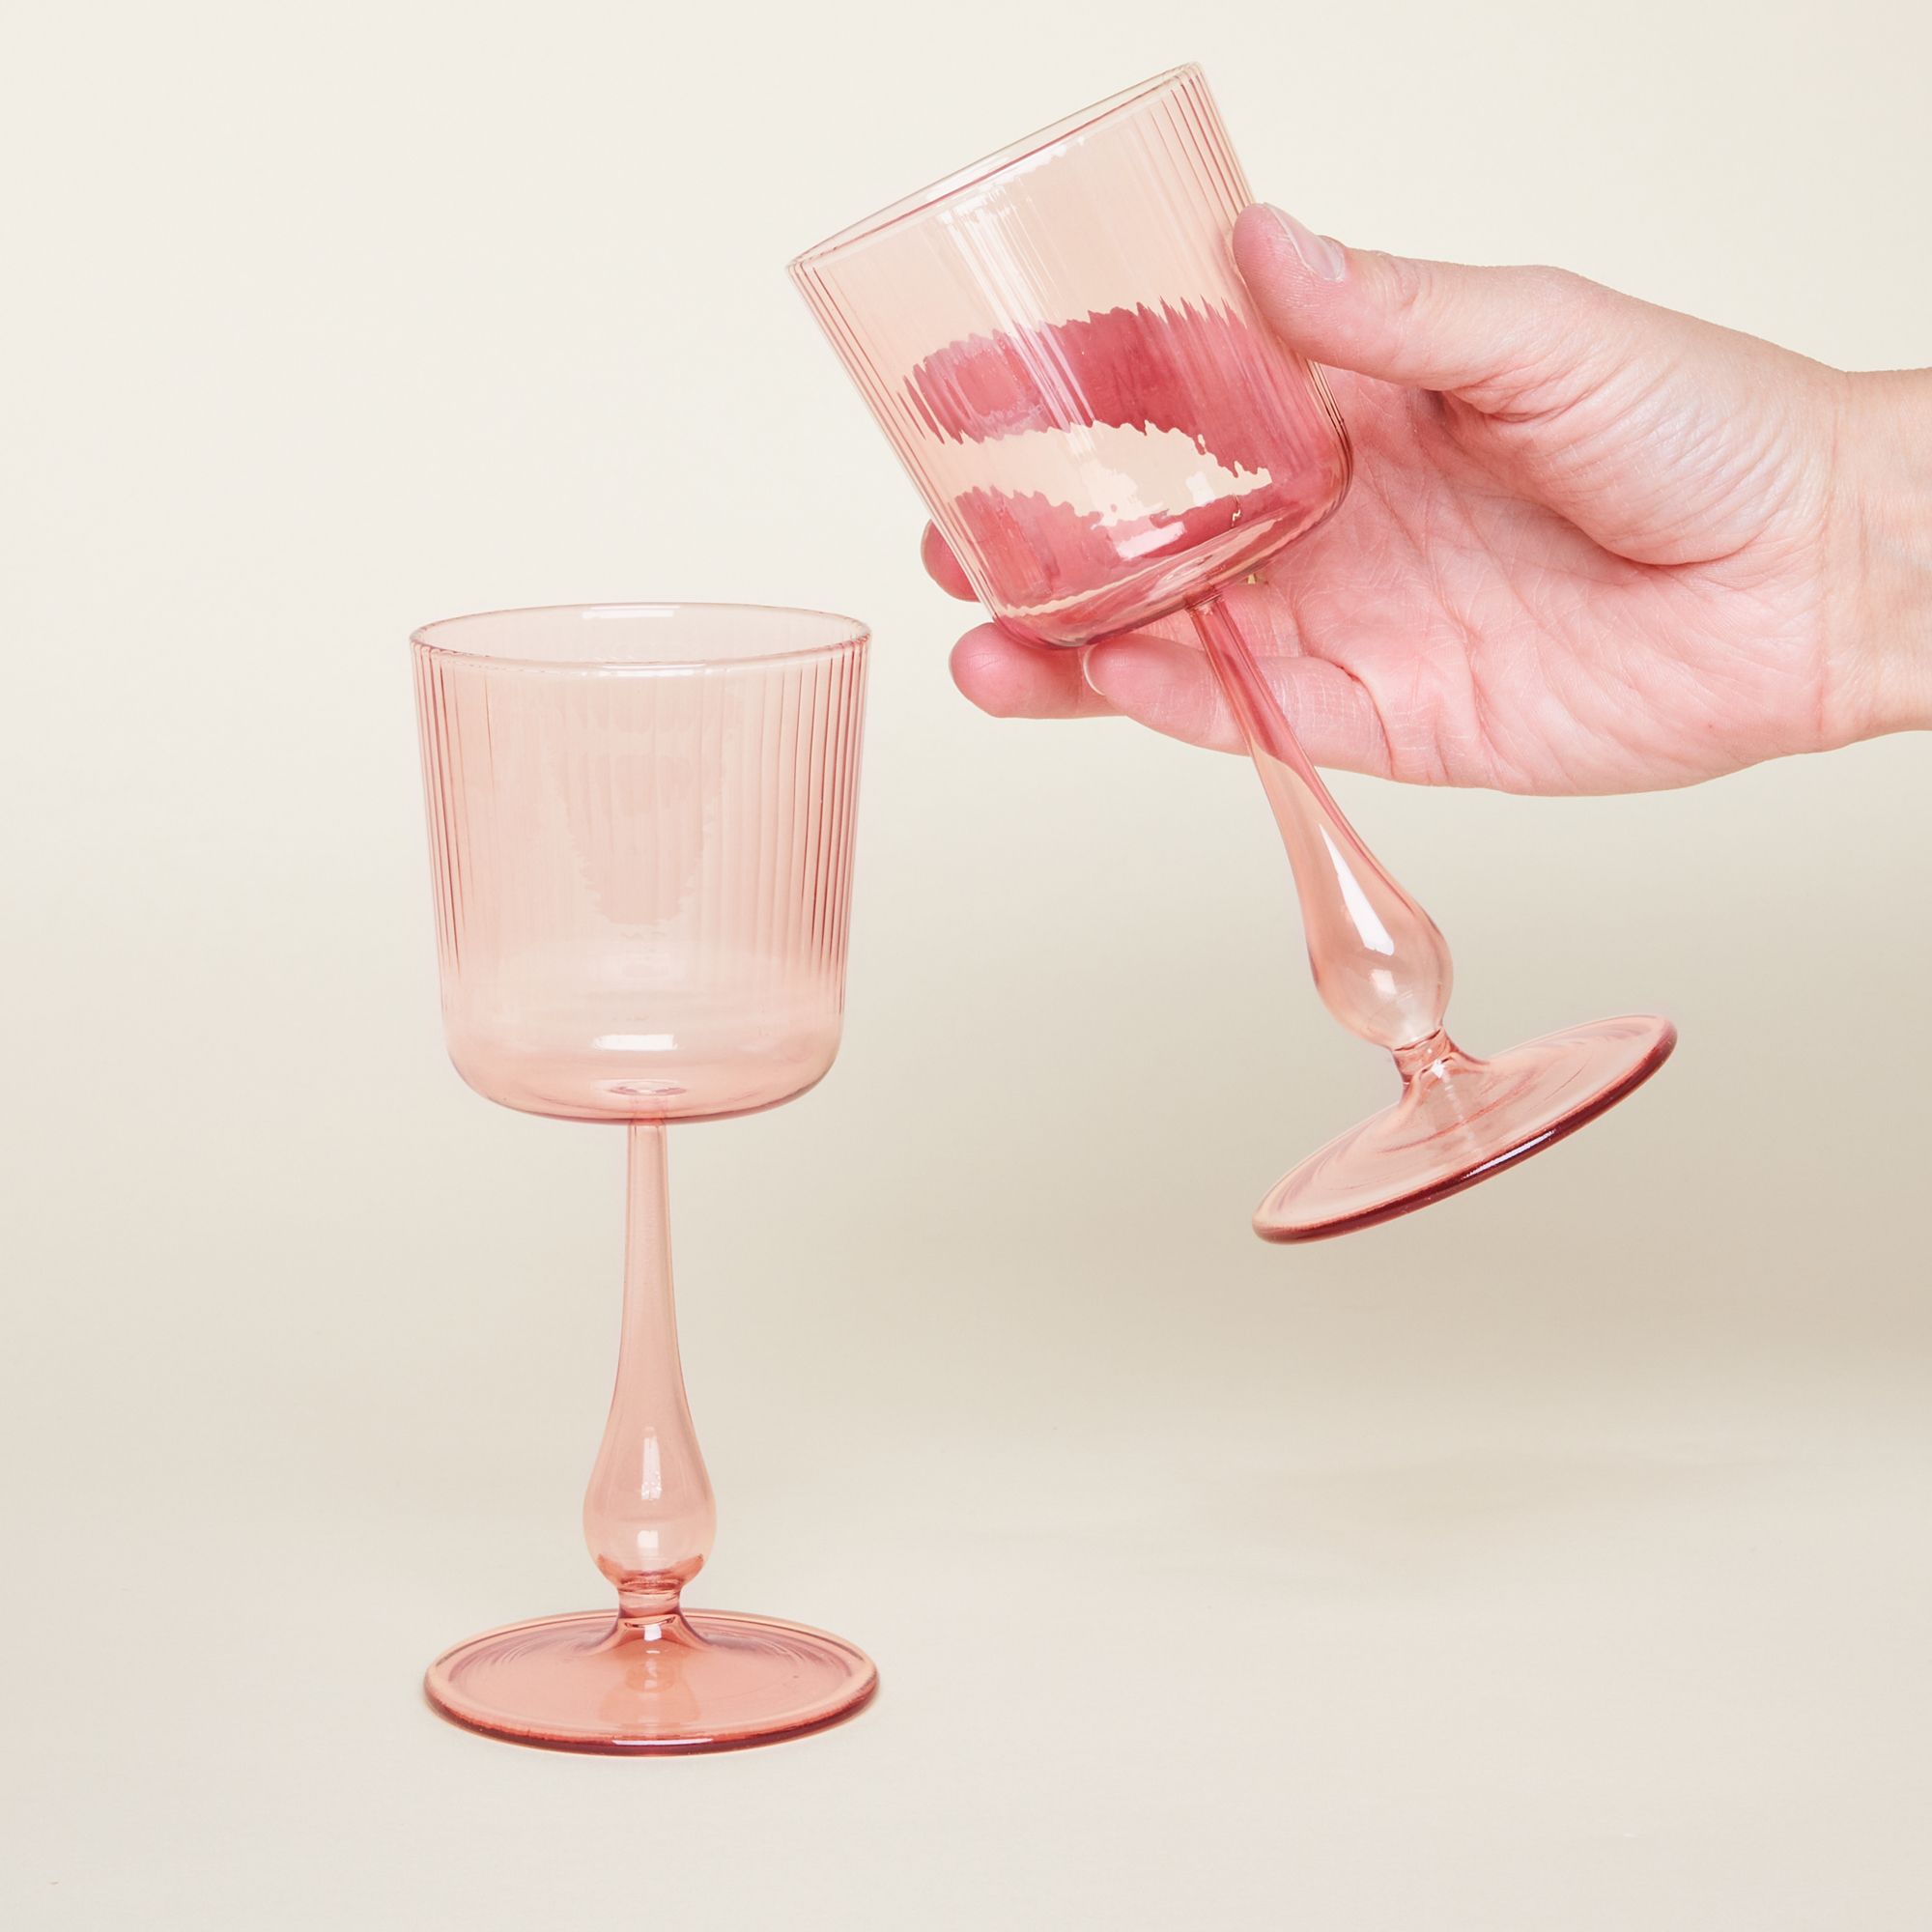 Stemmed wine glasses with grooves on the cup and stems that bow out at the end before their foot. They come in three colors: pale yellow, pale green and pale pink.